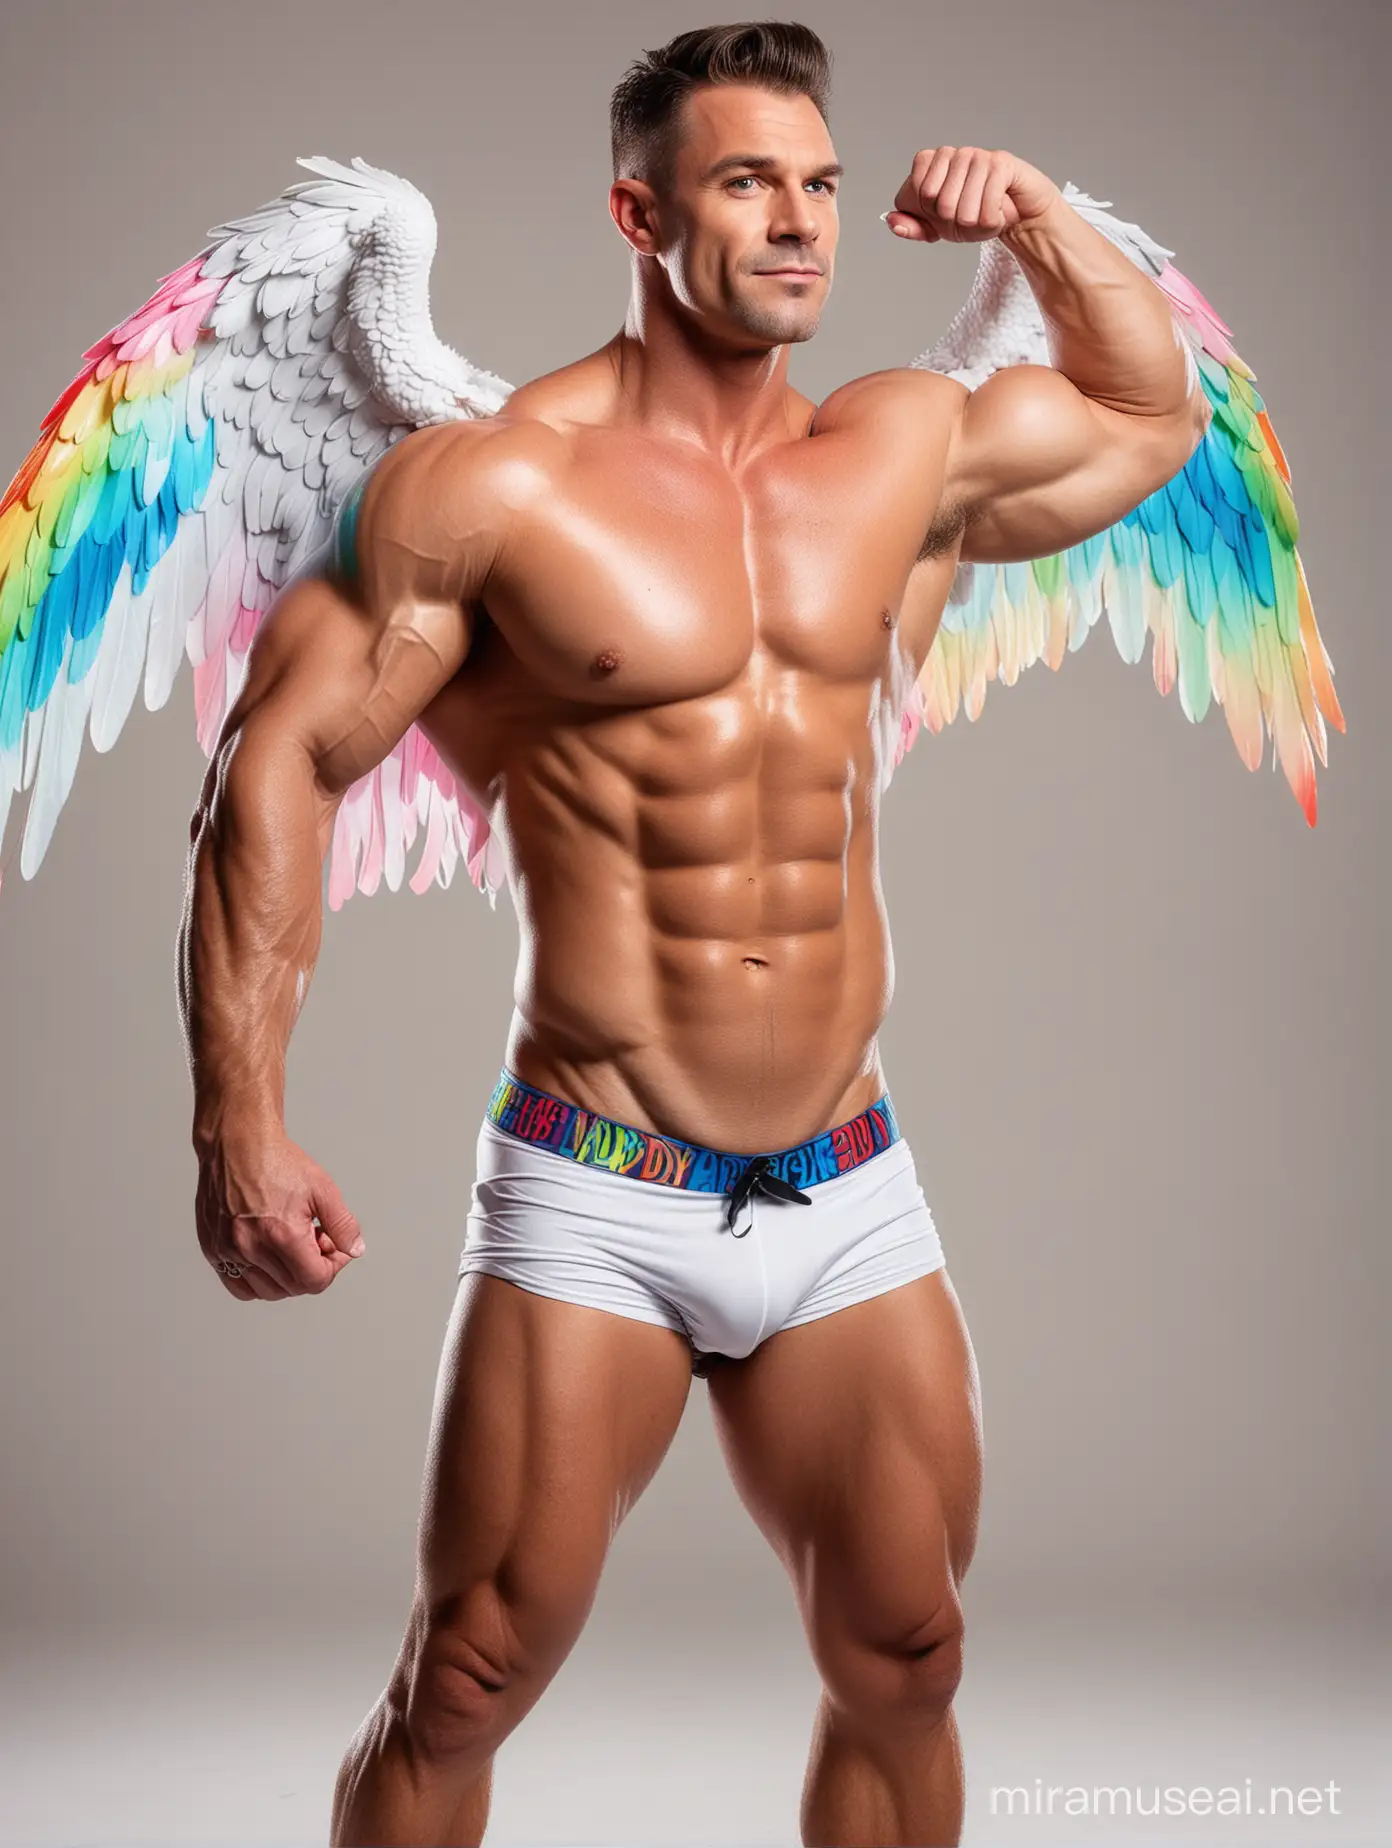 Studio Light Topless 30s Ultra Chunky IFBB Bodybuilder Daddy wearing Multi-Highlighter Bright Rainbow with white Coloured See Through Eagle Wings Shoulder LED Jacket Short shorts left arm Flexing Bicep Up Pose